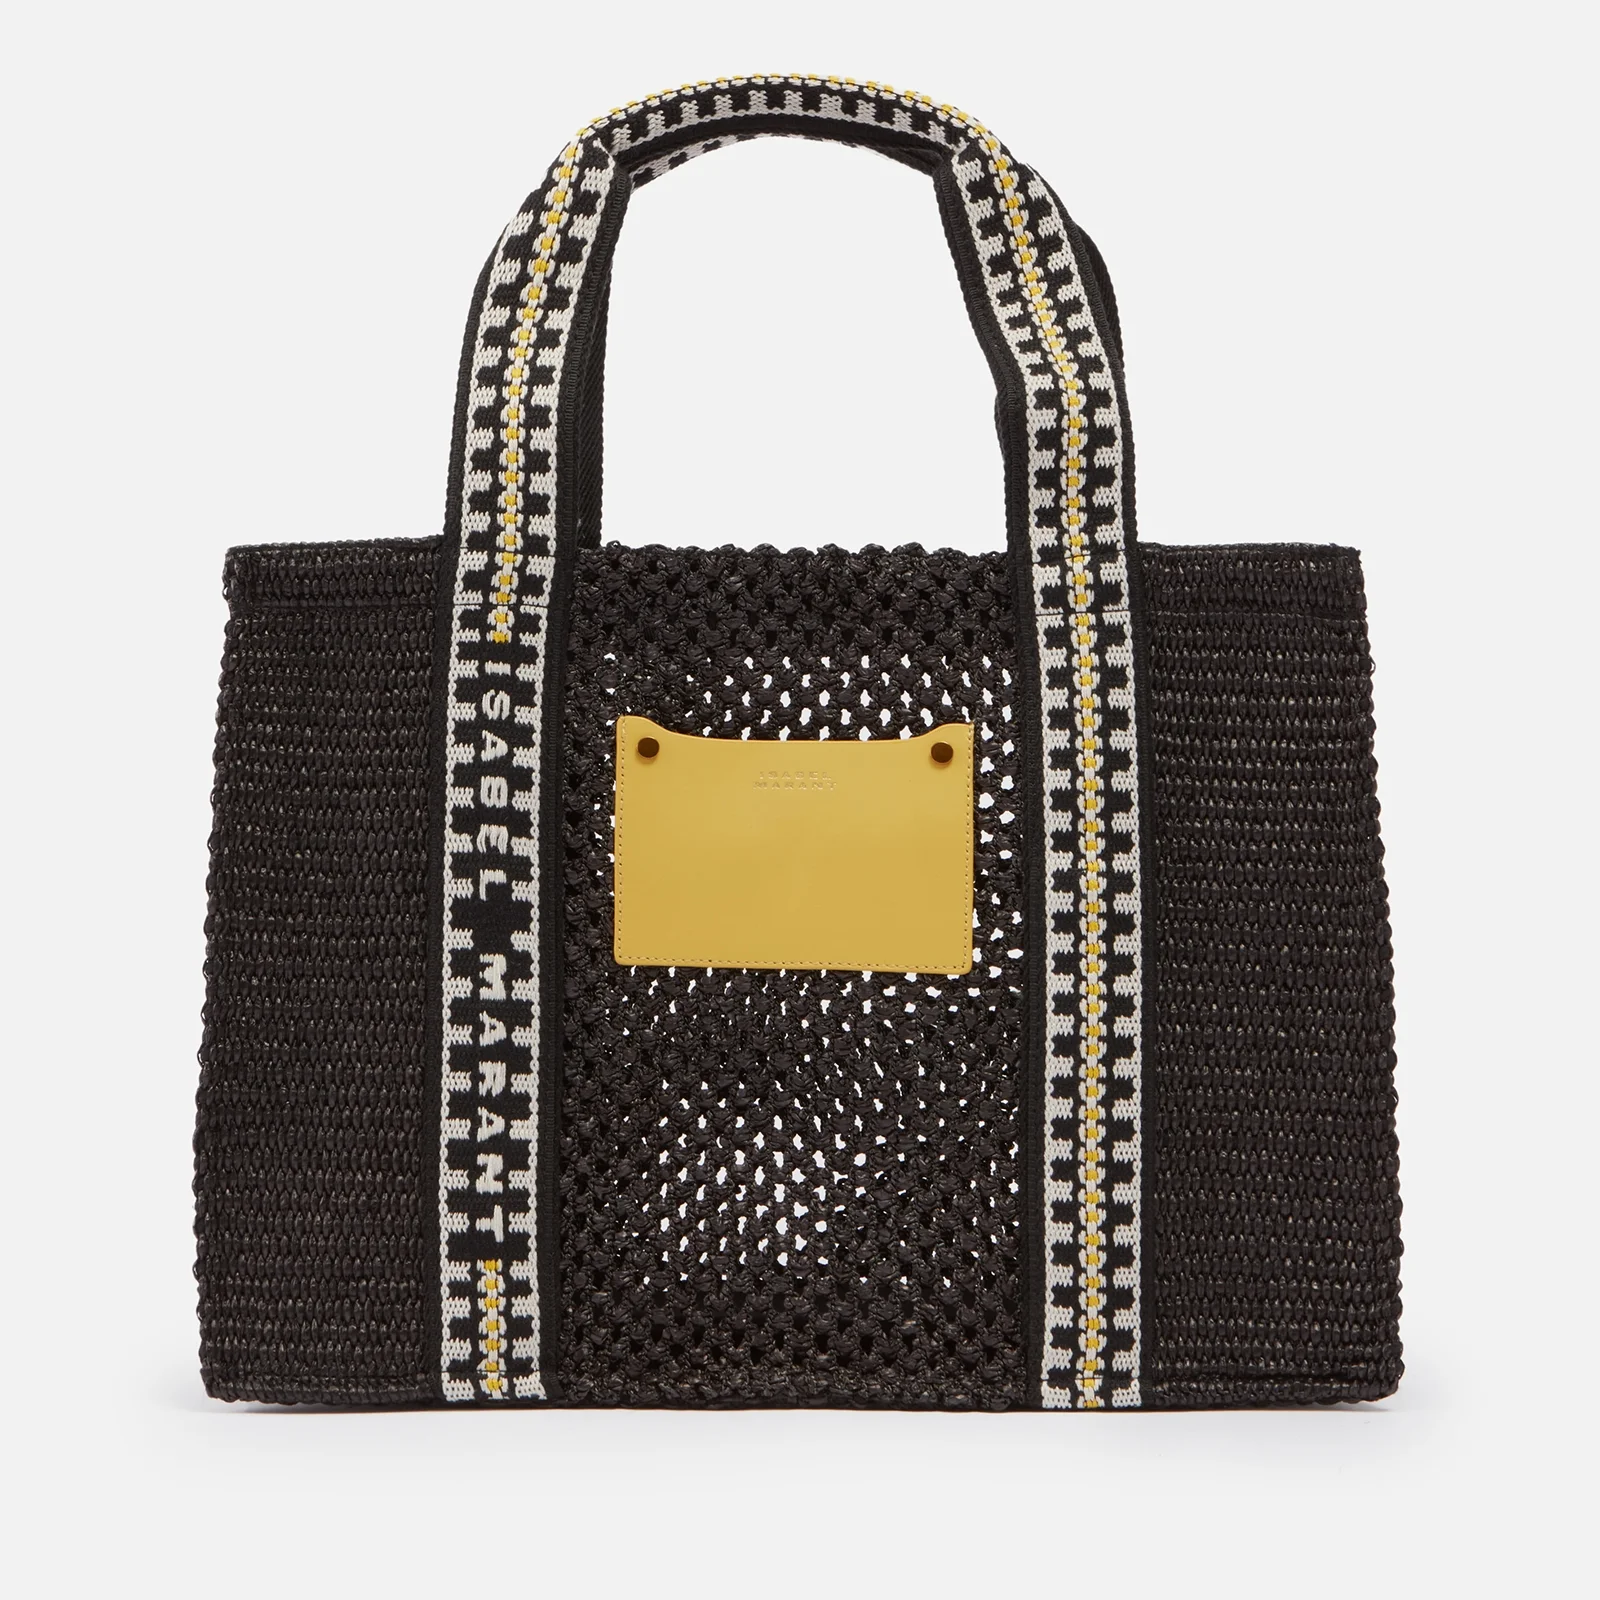 Isabel Marant Aruba Straw and Leather Tote Bag Image 1